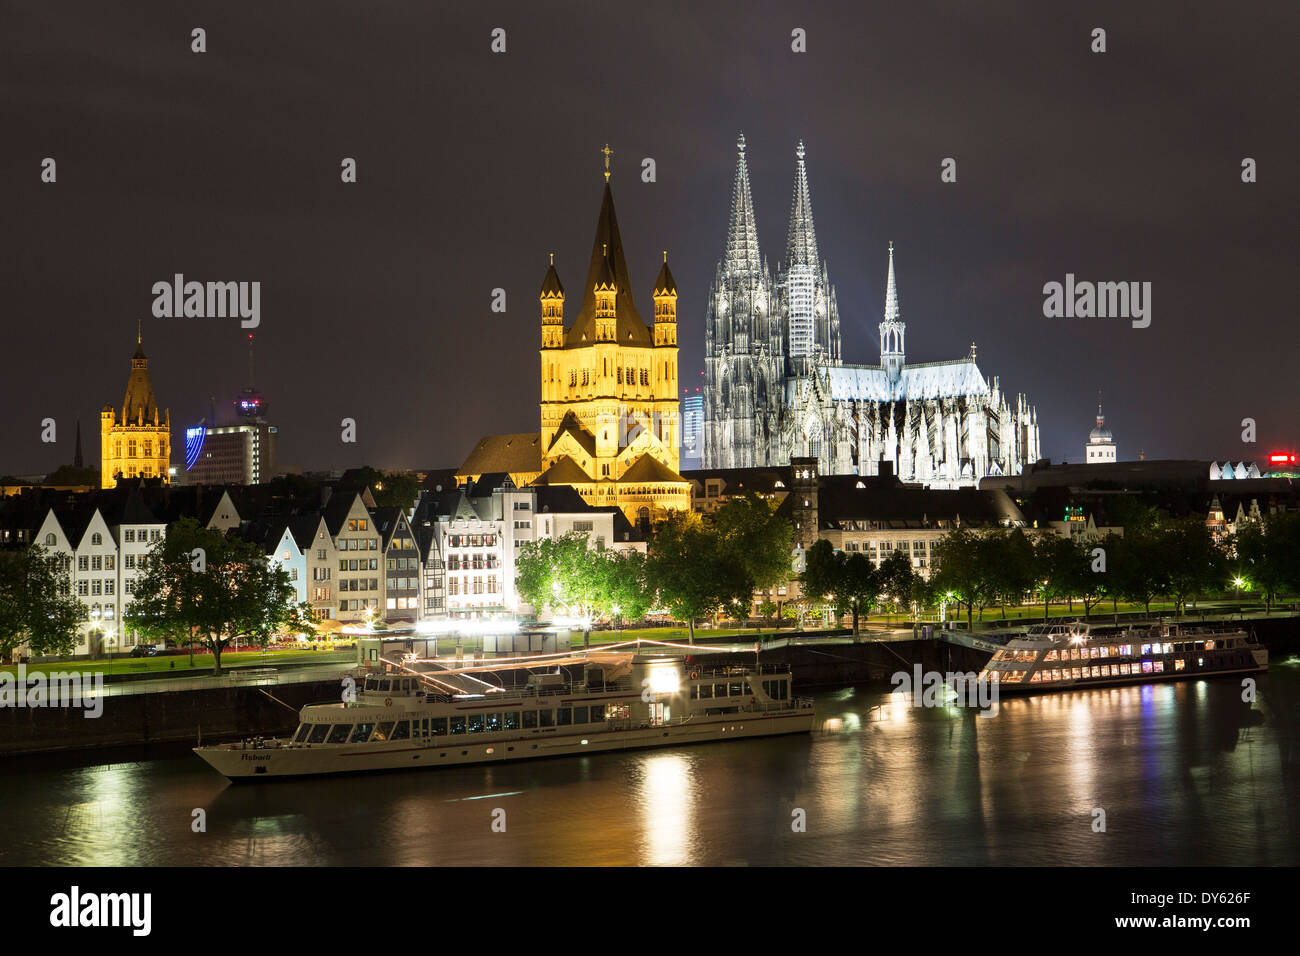 View over river Rhine to old town, Heumarkt with cathedral and Great St. Martin church, Cologne, North Rhine-Westphalia, Germany Stock Photo